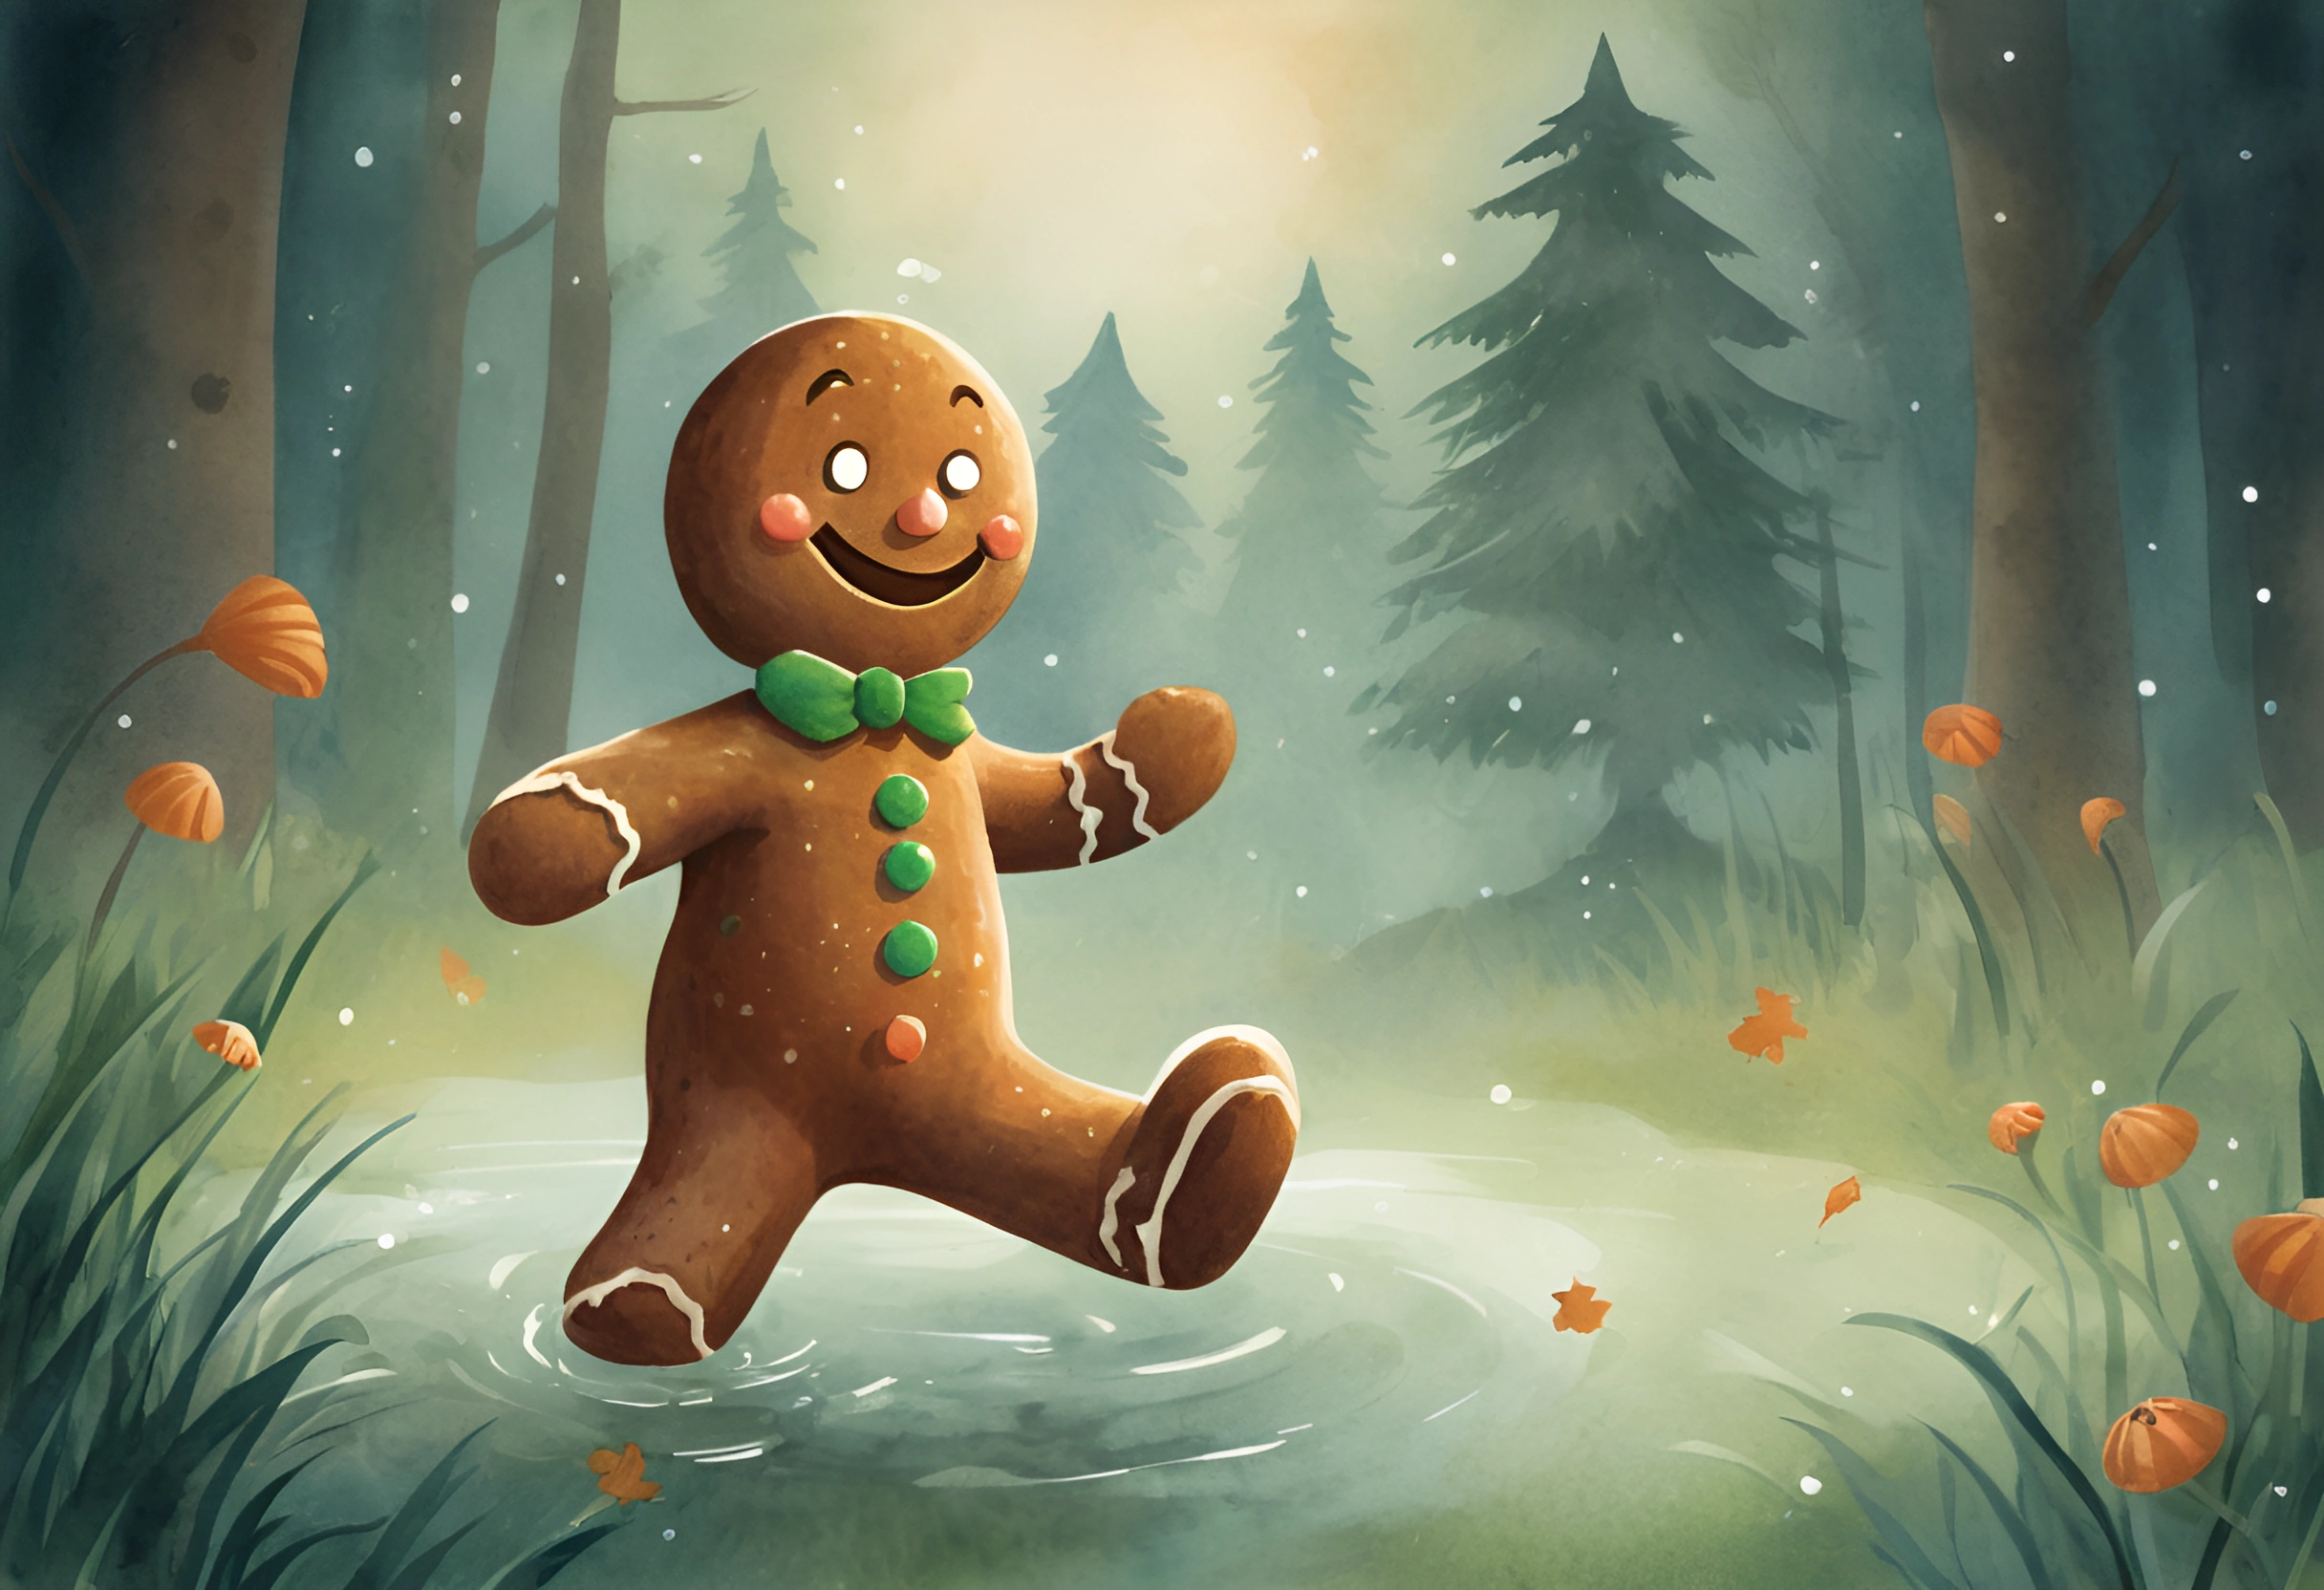 The gingerbread man waving in a forest